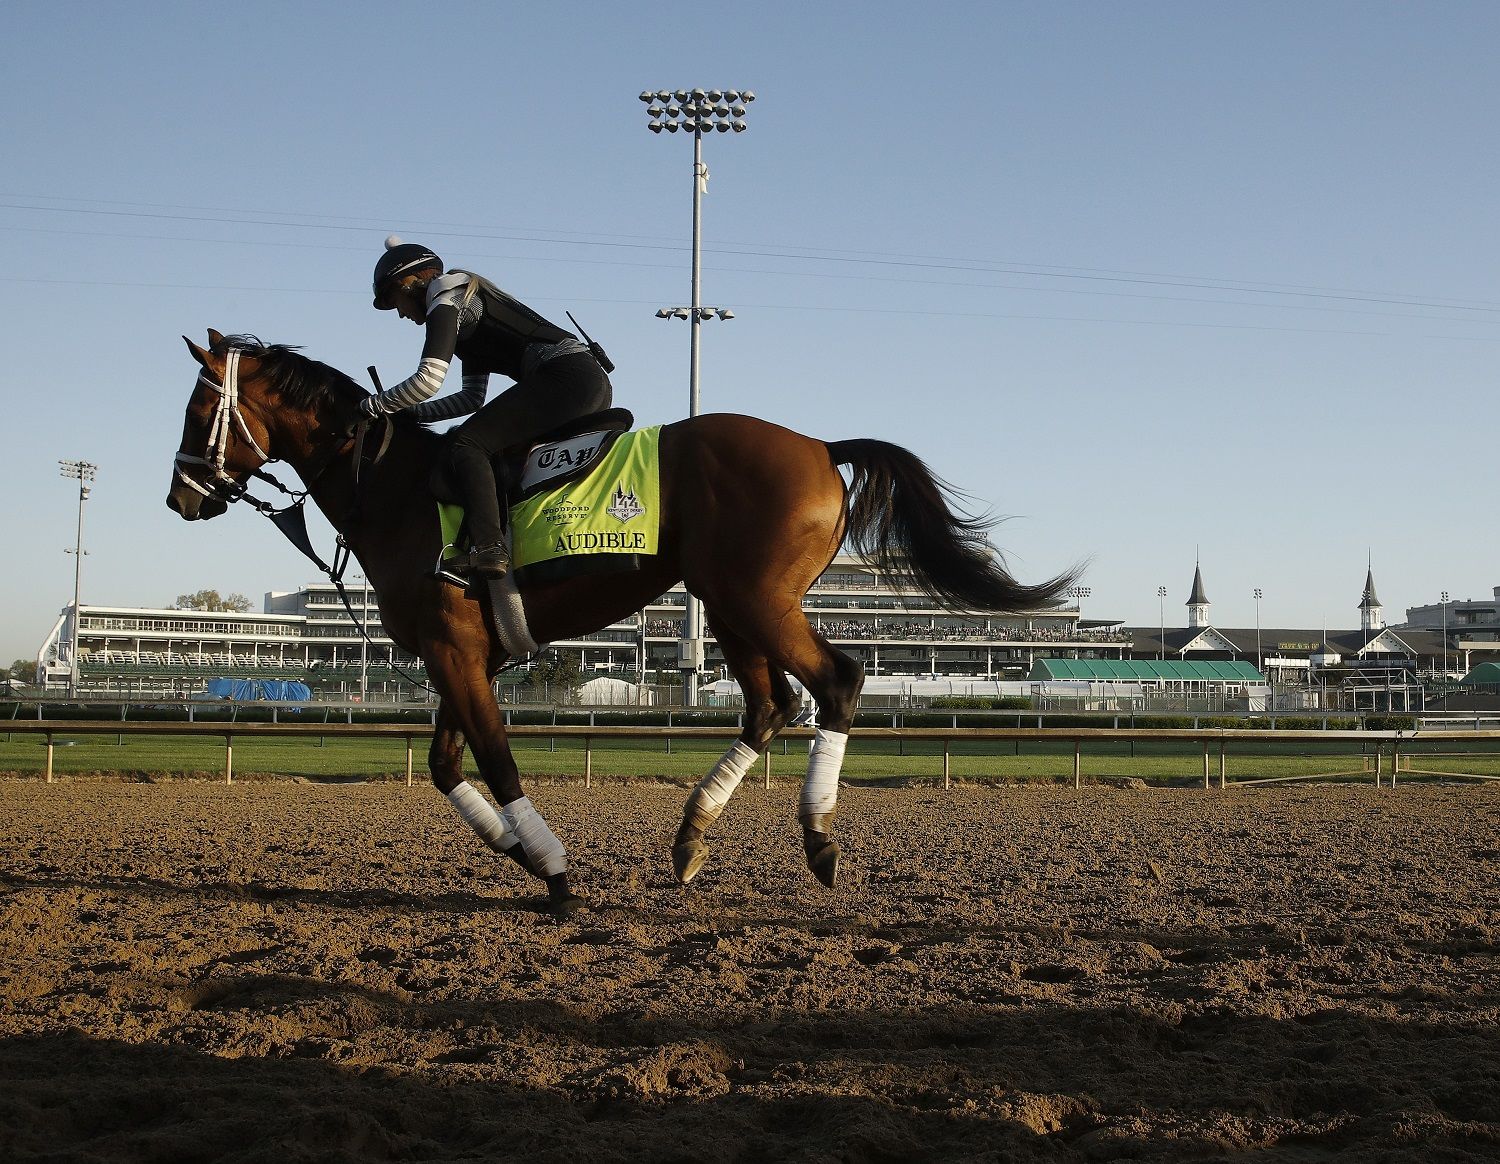 Kentucky Derby hopeful Audible runs during a morning workout at Churchill Downs Tuesday, May 1, 2018, in Louisville, Ky. The 144th running of the Kentucky Derby is scheduled for Saturday, May 5. (AP Photo/Charlie Riedel)